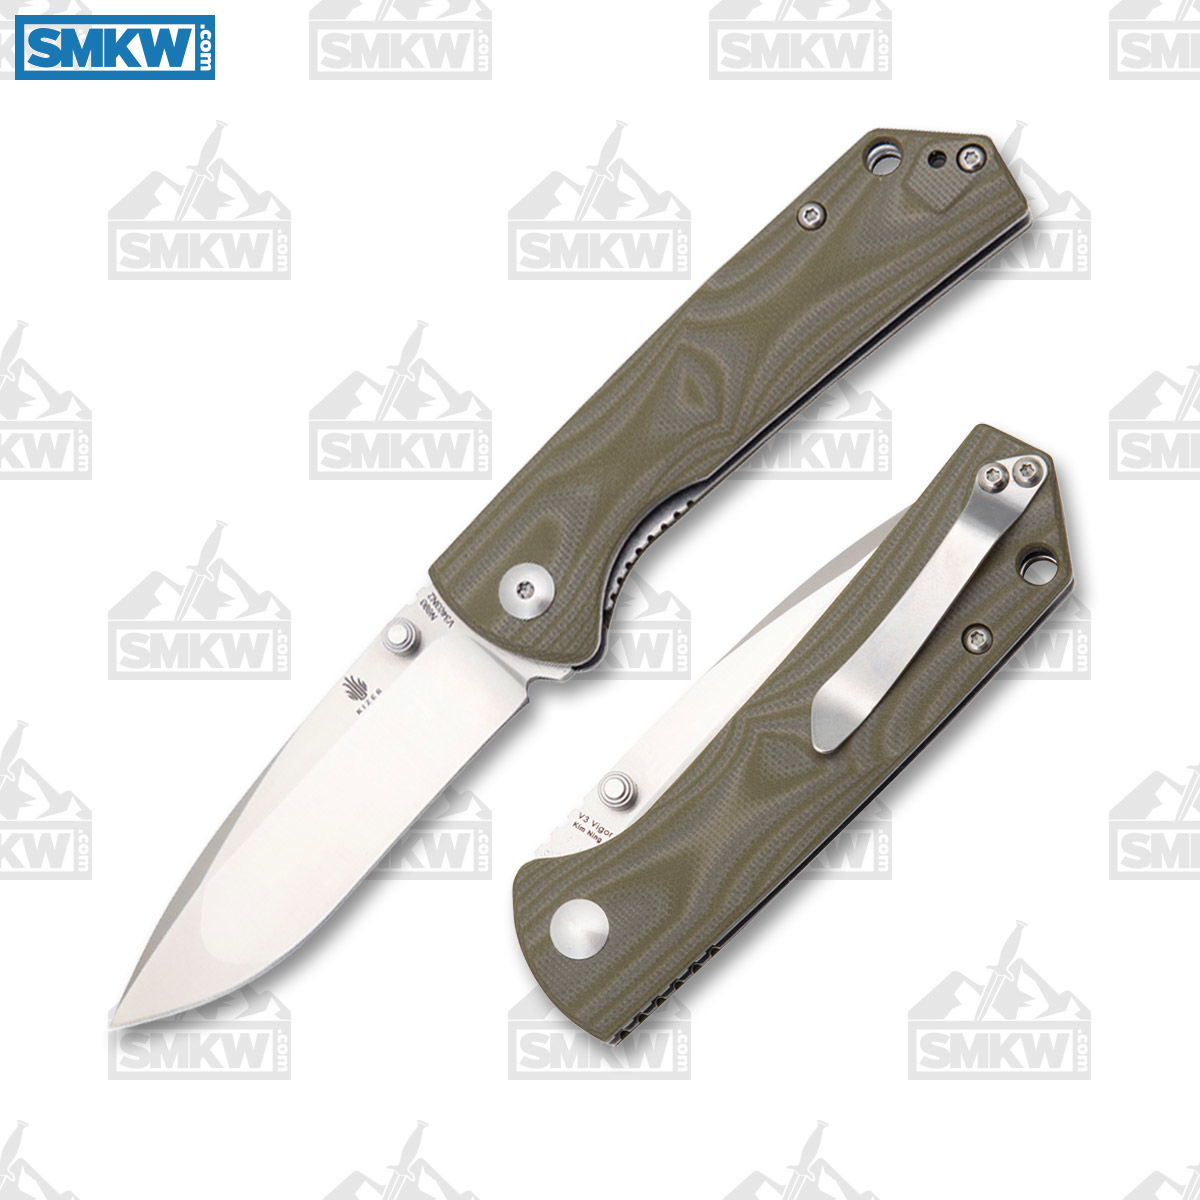 Kizer V3 Vigor VG-10 Stainless Steel Blade Green G-10 Handle - $50 (Free S/H over $75, excl. ammo)